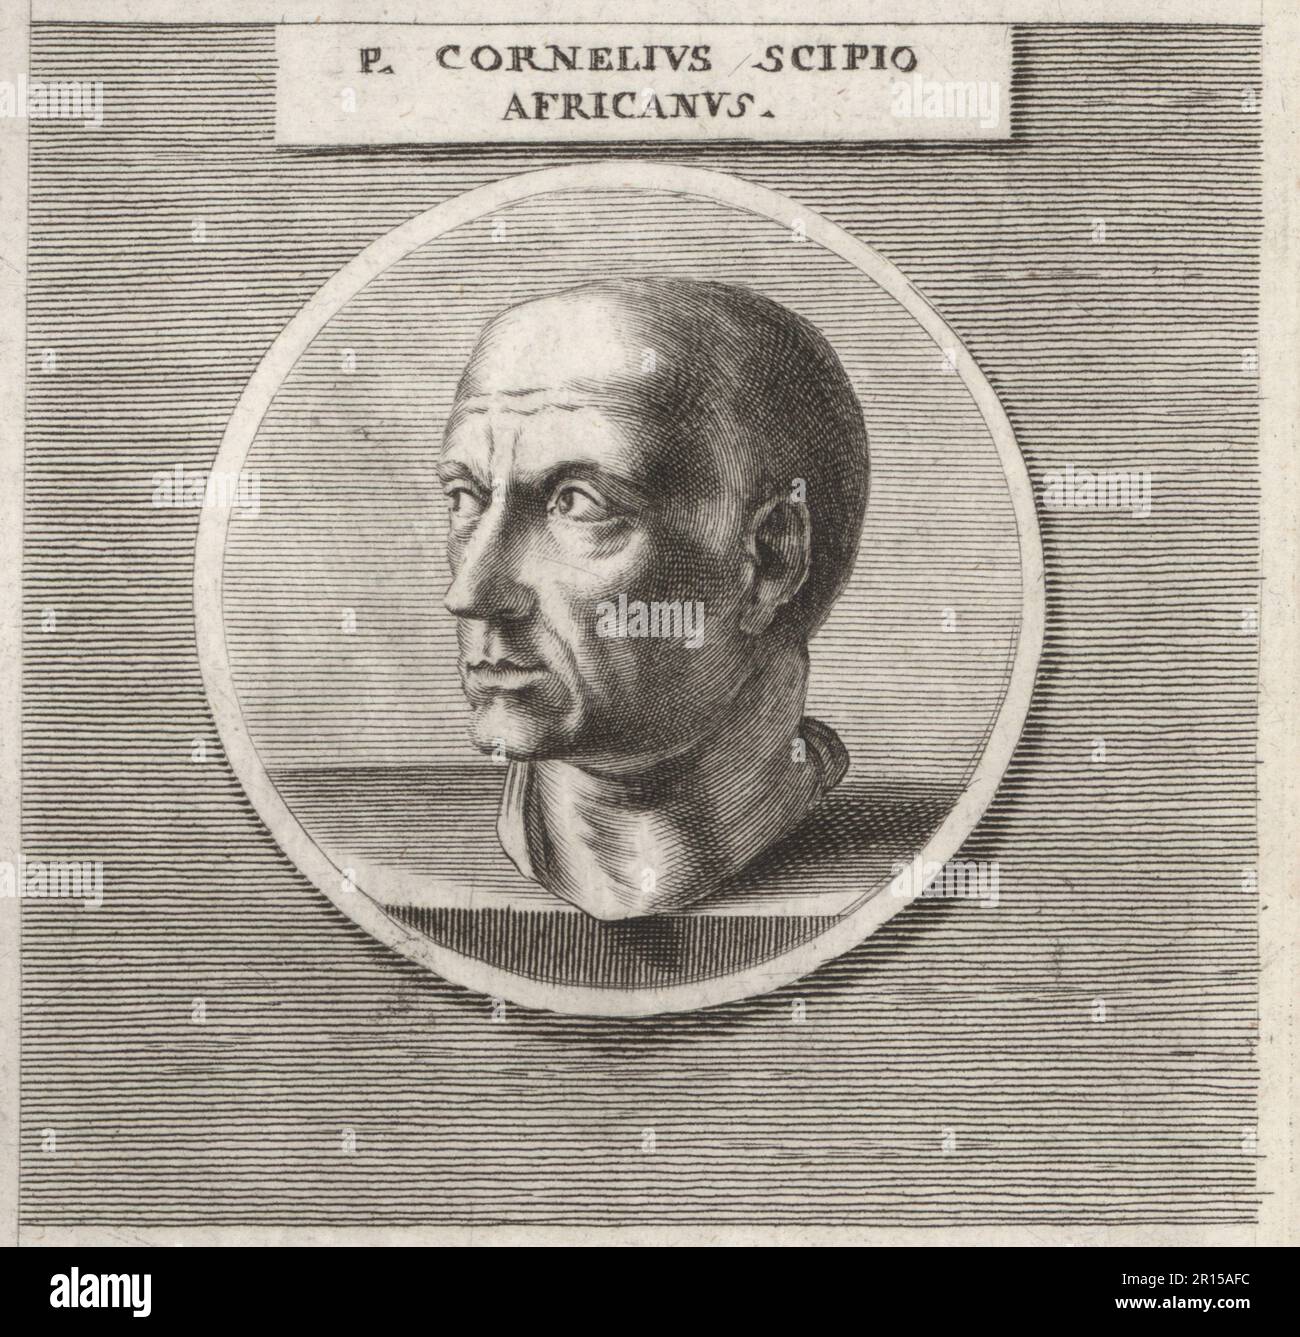 Publius Cornelius Scipio Africanus, Roman general and politician, 236-183 BC. Led Rome to victory against Carthage in the Second Punic War and defeated Hannibal at the Battle of Zama in 202 BC. P. Cornelius Scipio Africanus. Copperplate engraving after an illustration by Joachim von Sandrart from his L’Academia Todesca, della Architectura, Scultura & Pittura, oder Teutsche Academie, der Edlen Bau- Bild- und Mahlerey-Kunste, German Academy of Architecture, Sculpture and Painting, Jacob von Sandrart, Nuremberg, 1675. Stock Photo